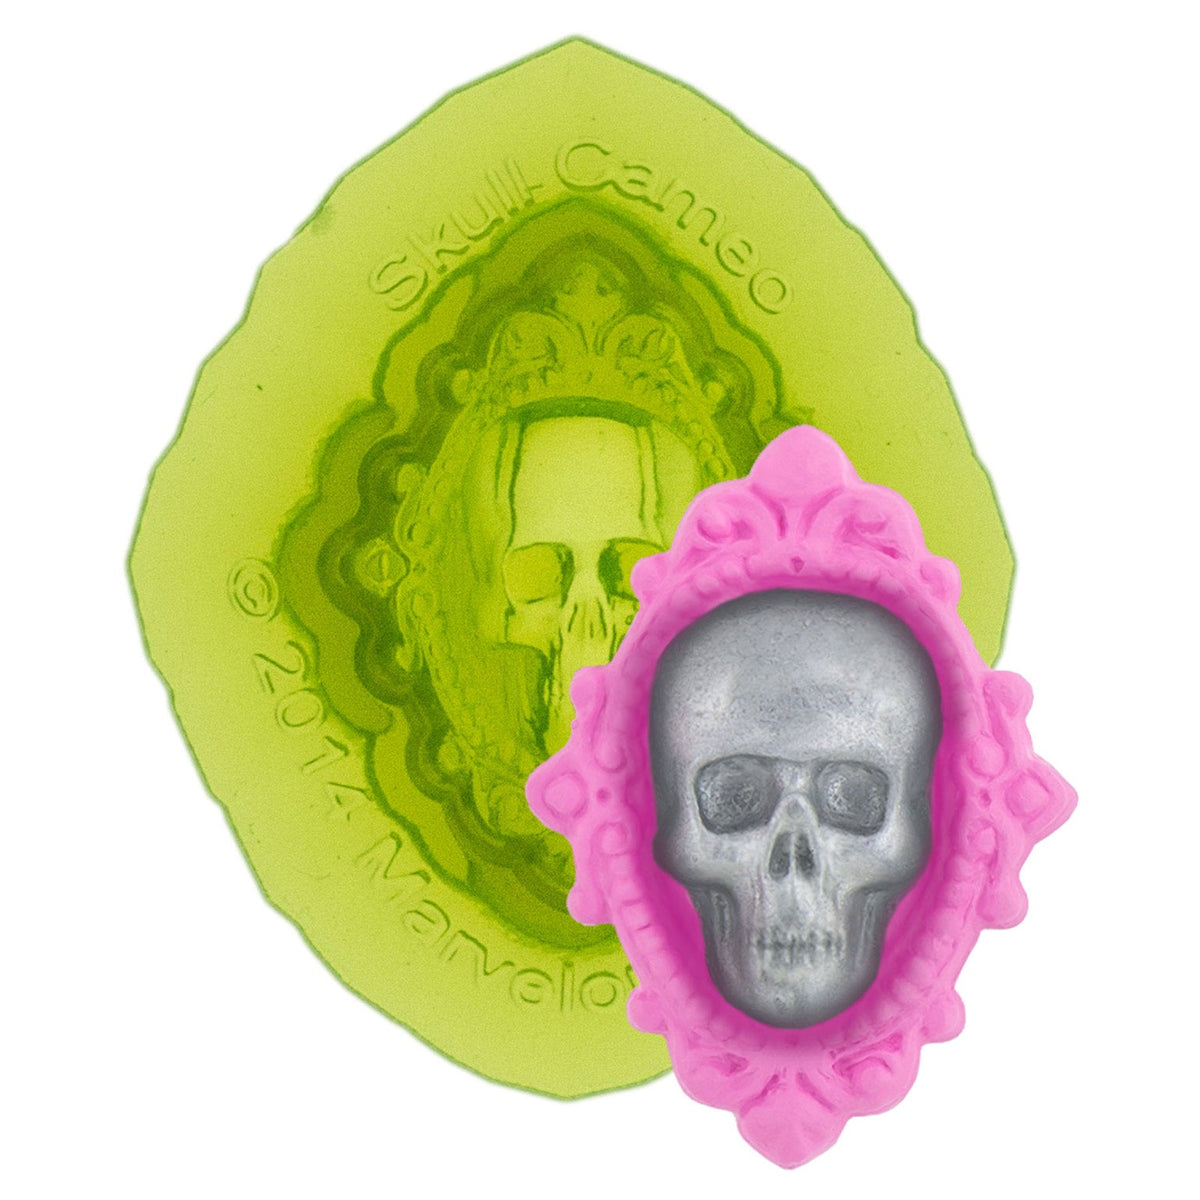 Skull Cameo Silicone Sprig Mold for Ceramics and Pottery by Marvelous Molds